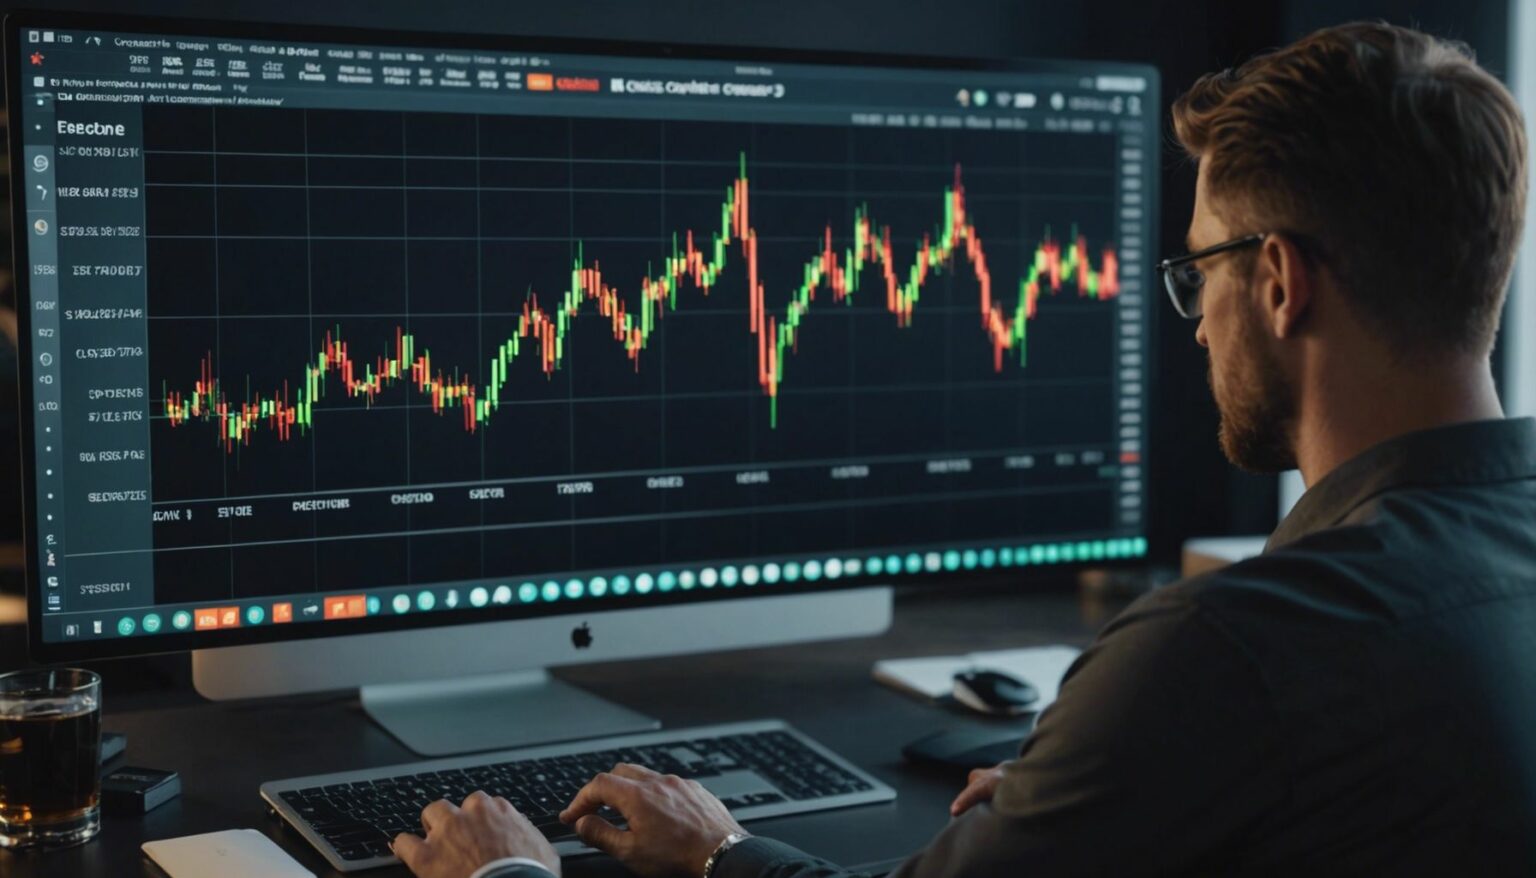 Confident trader analyzing data with digital graph and cryptocurrency icons, showcasing successful crypto trading strategies.